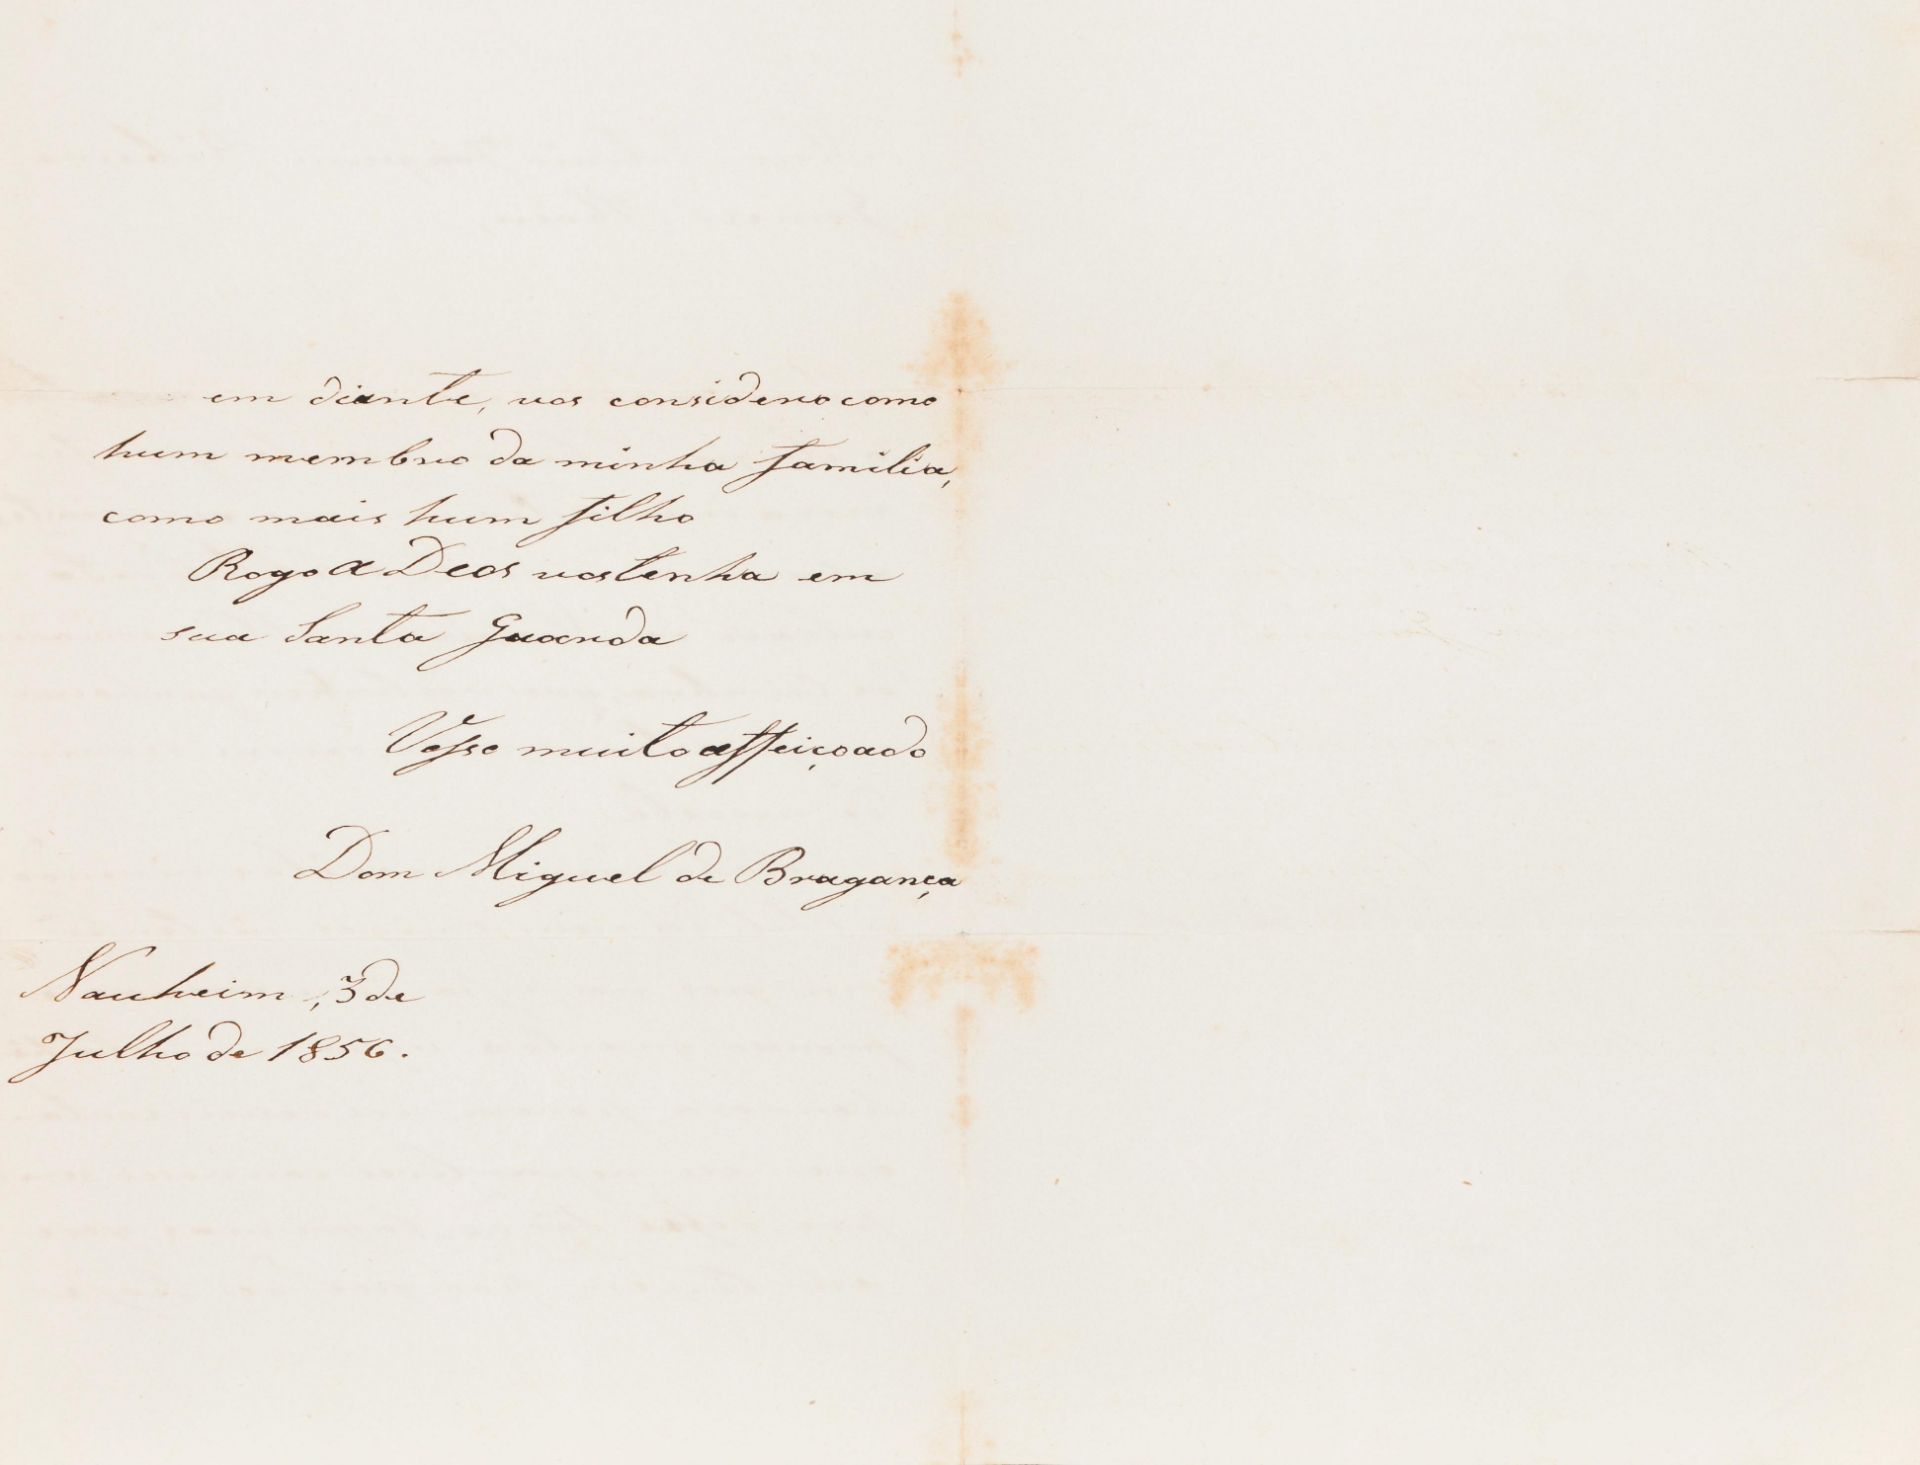 A letter by King Miguel I of Portugal to the Dr. António Joaquim Ribeiro Gomes Abreu